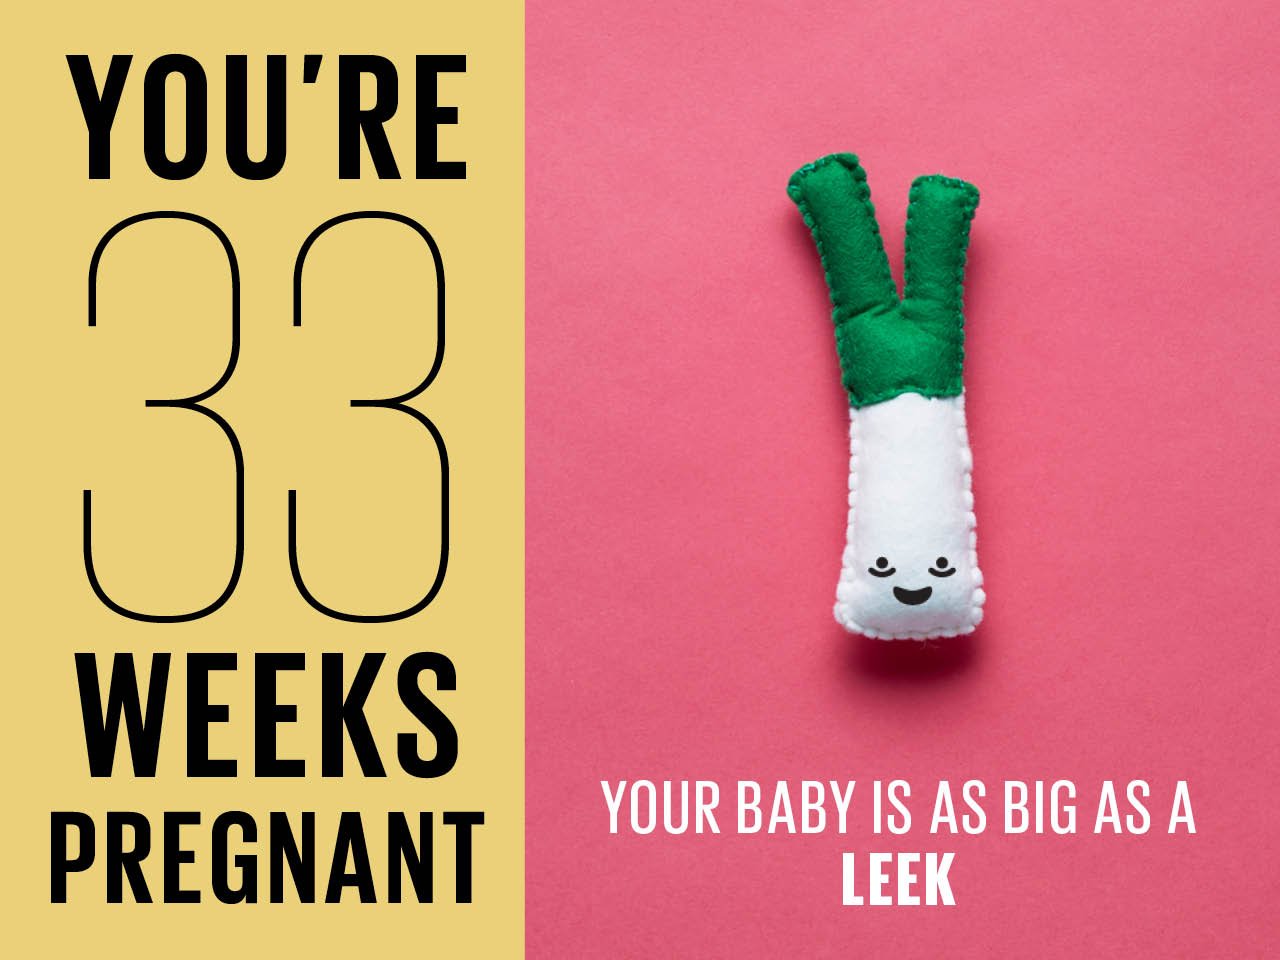 Felt leek used to show how big baby is at 33 weeks pregnant